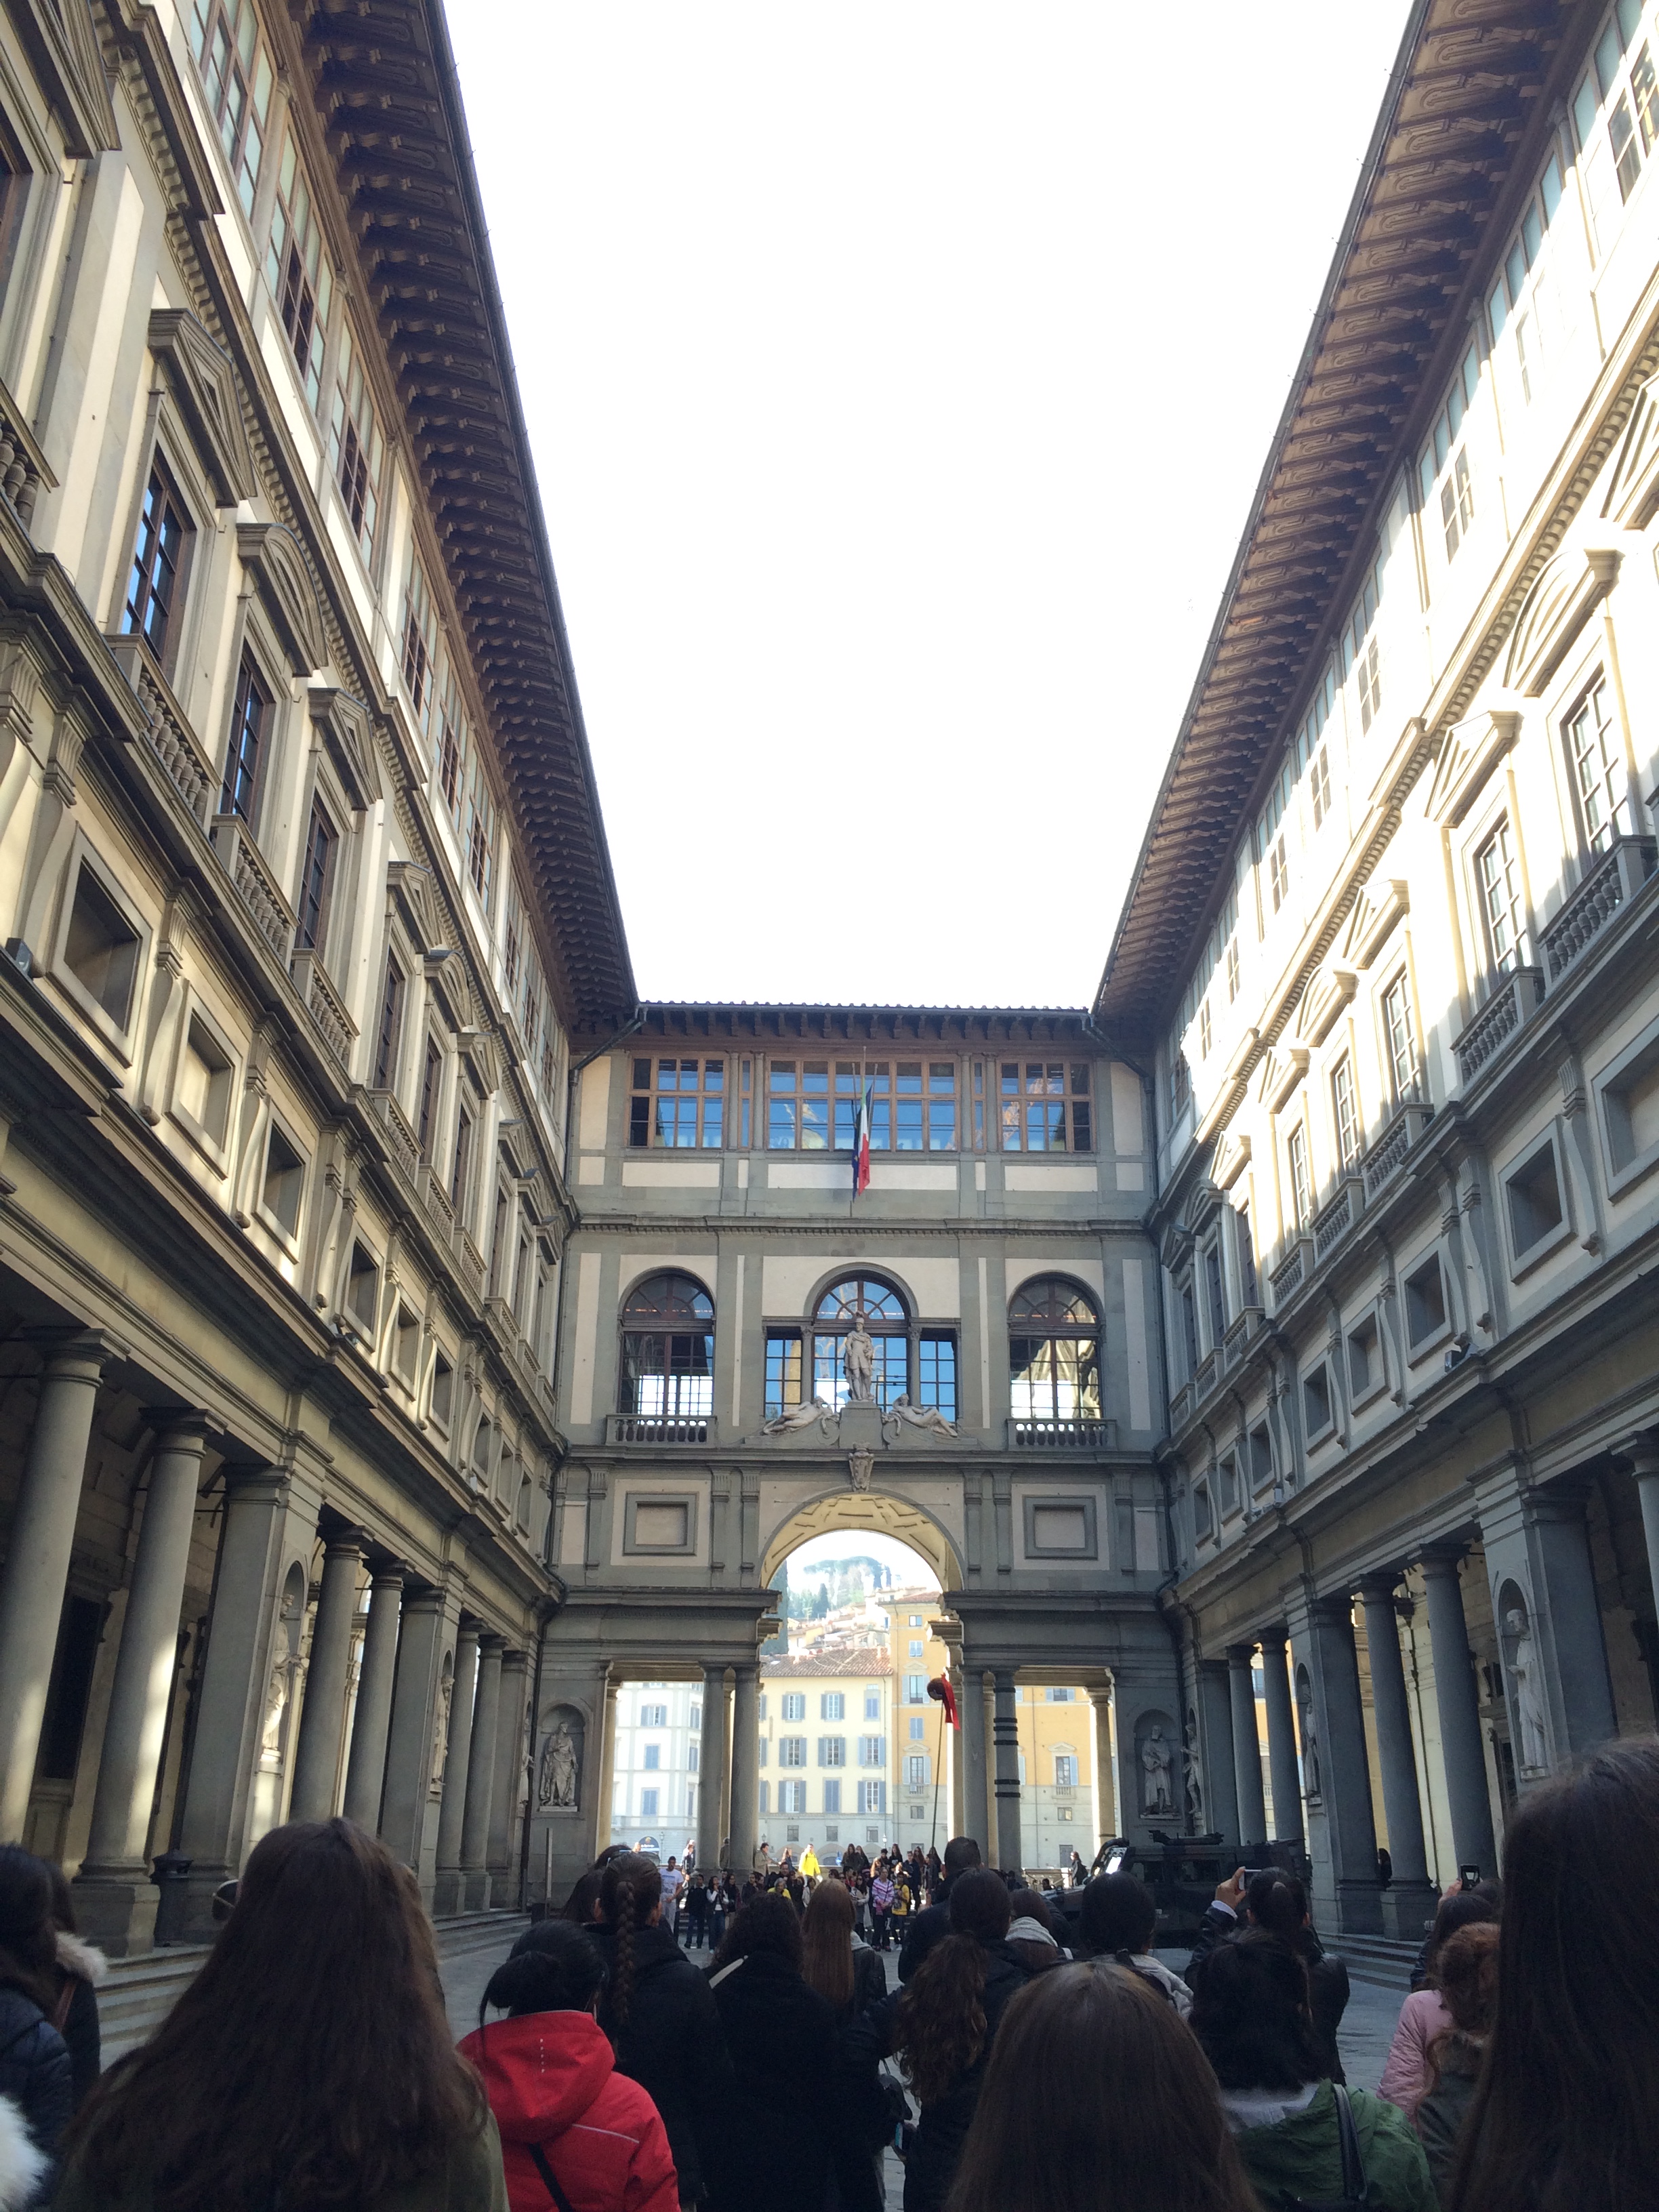 Image of archway above the walkway to the Uffizi